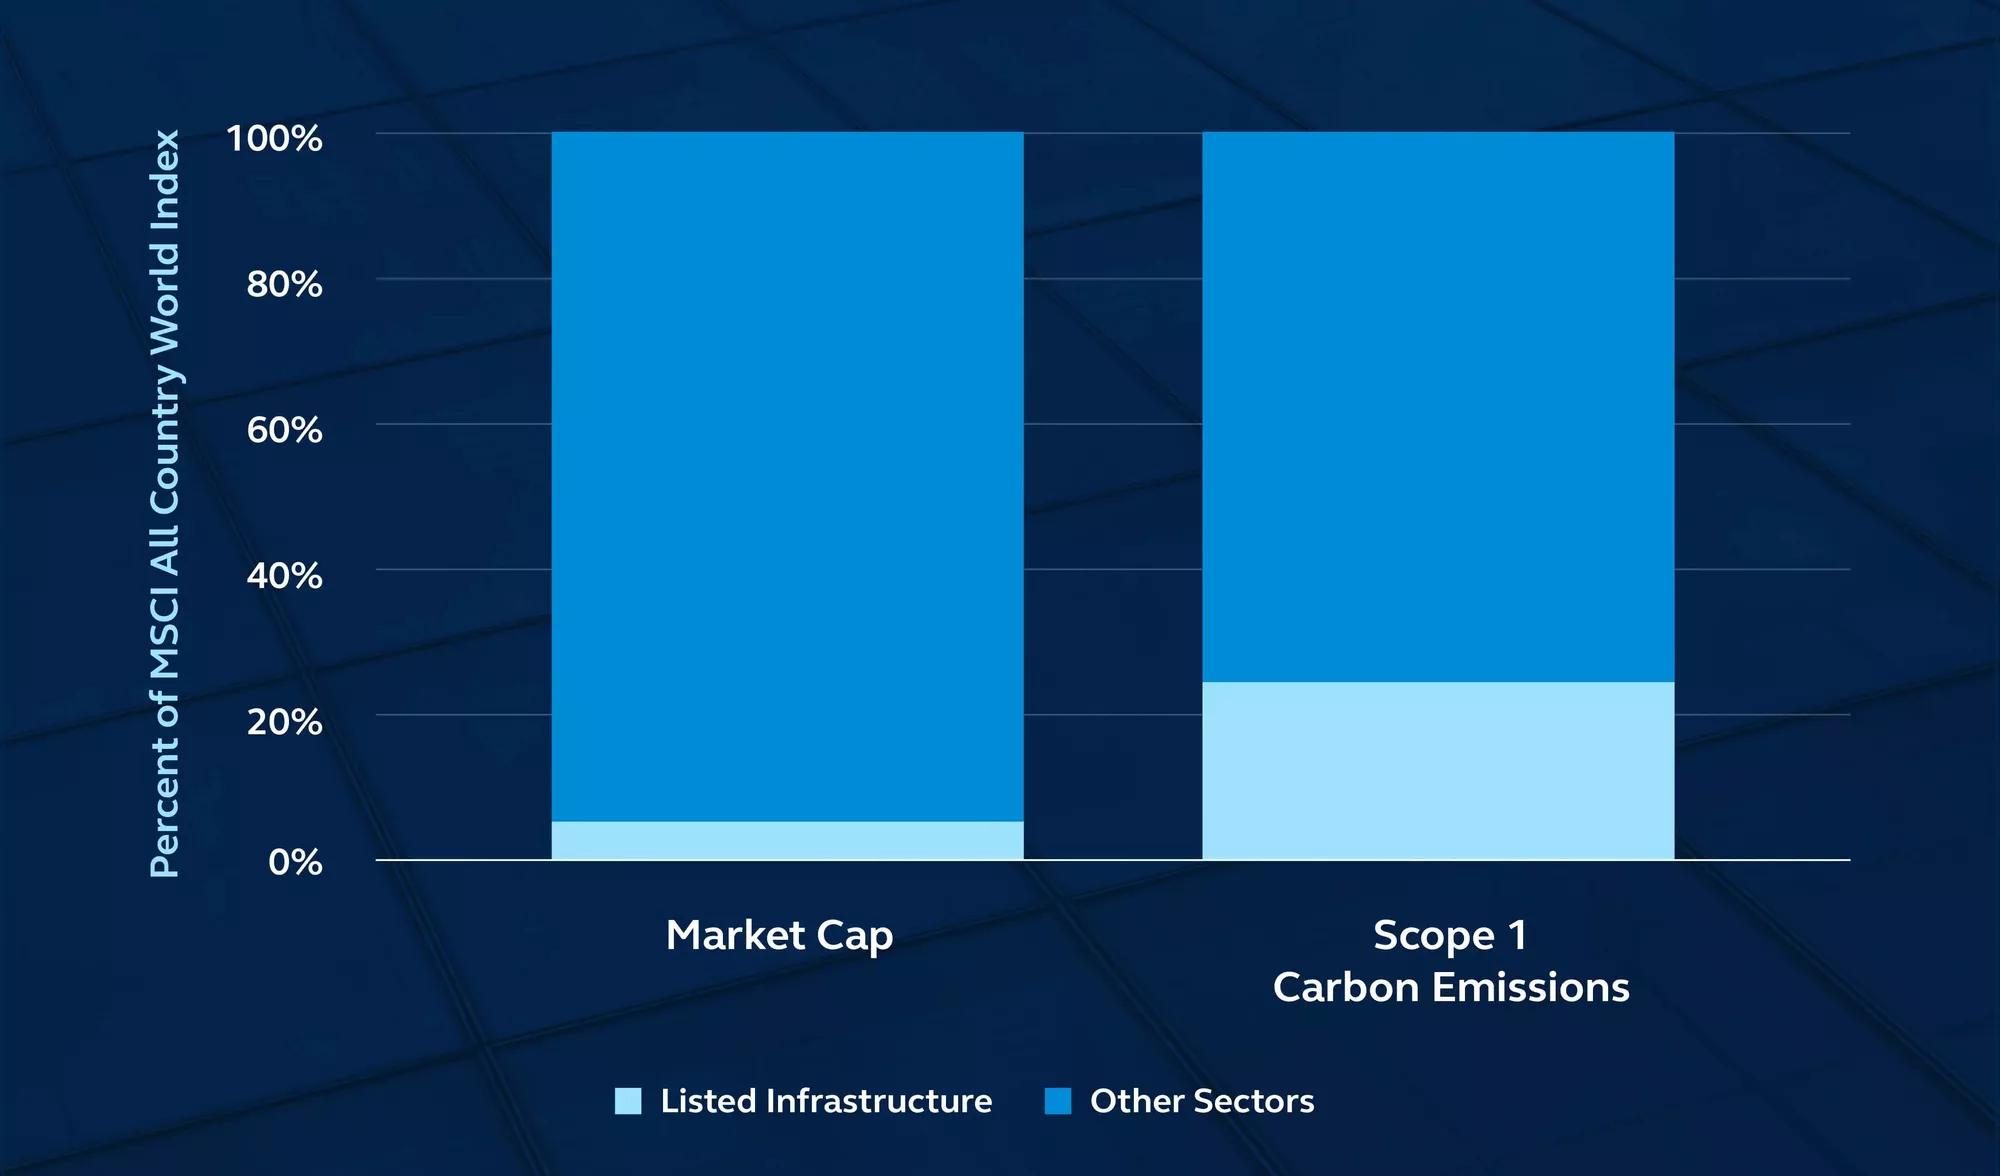 Market Cap and Scope 1 Carbon Emissions of listed infrastructure companies